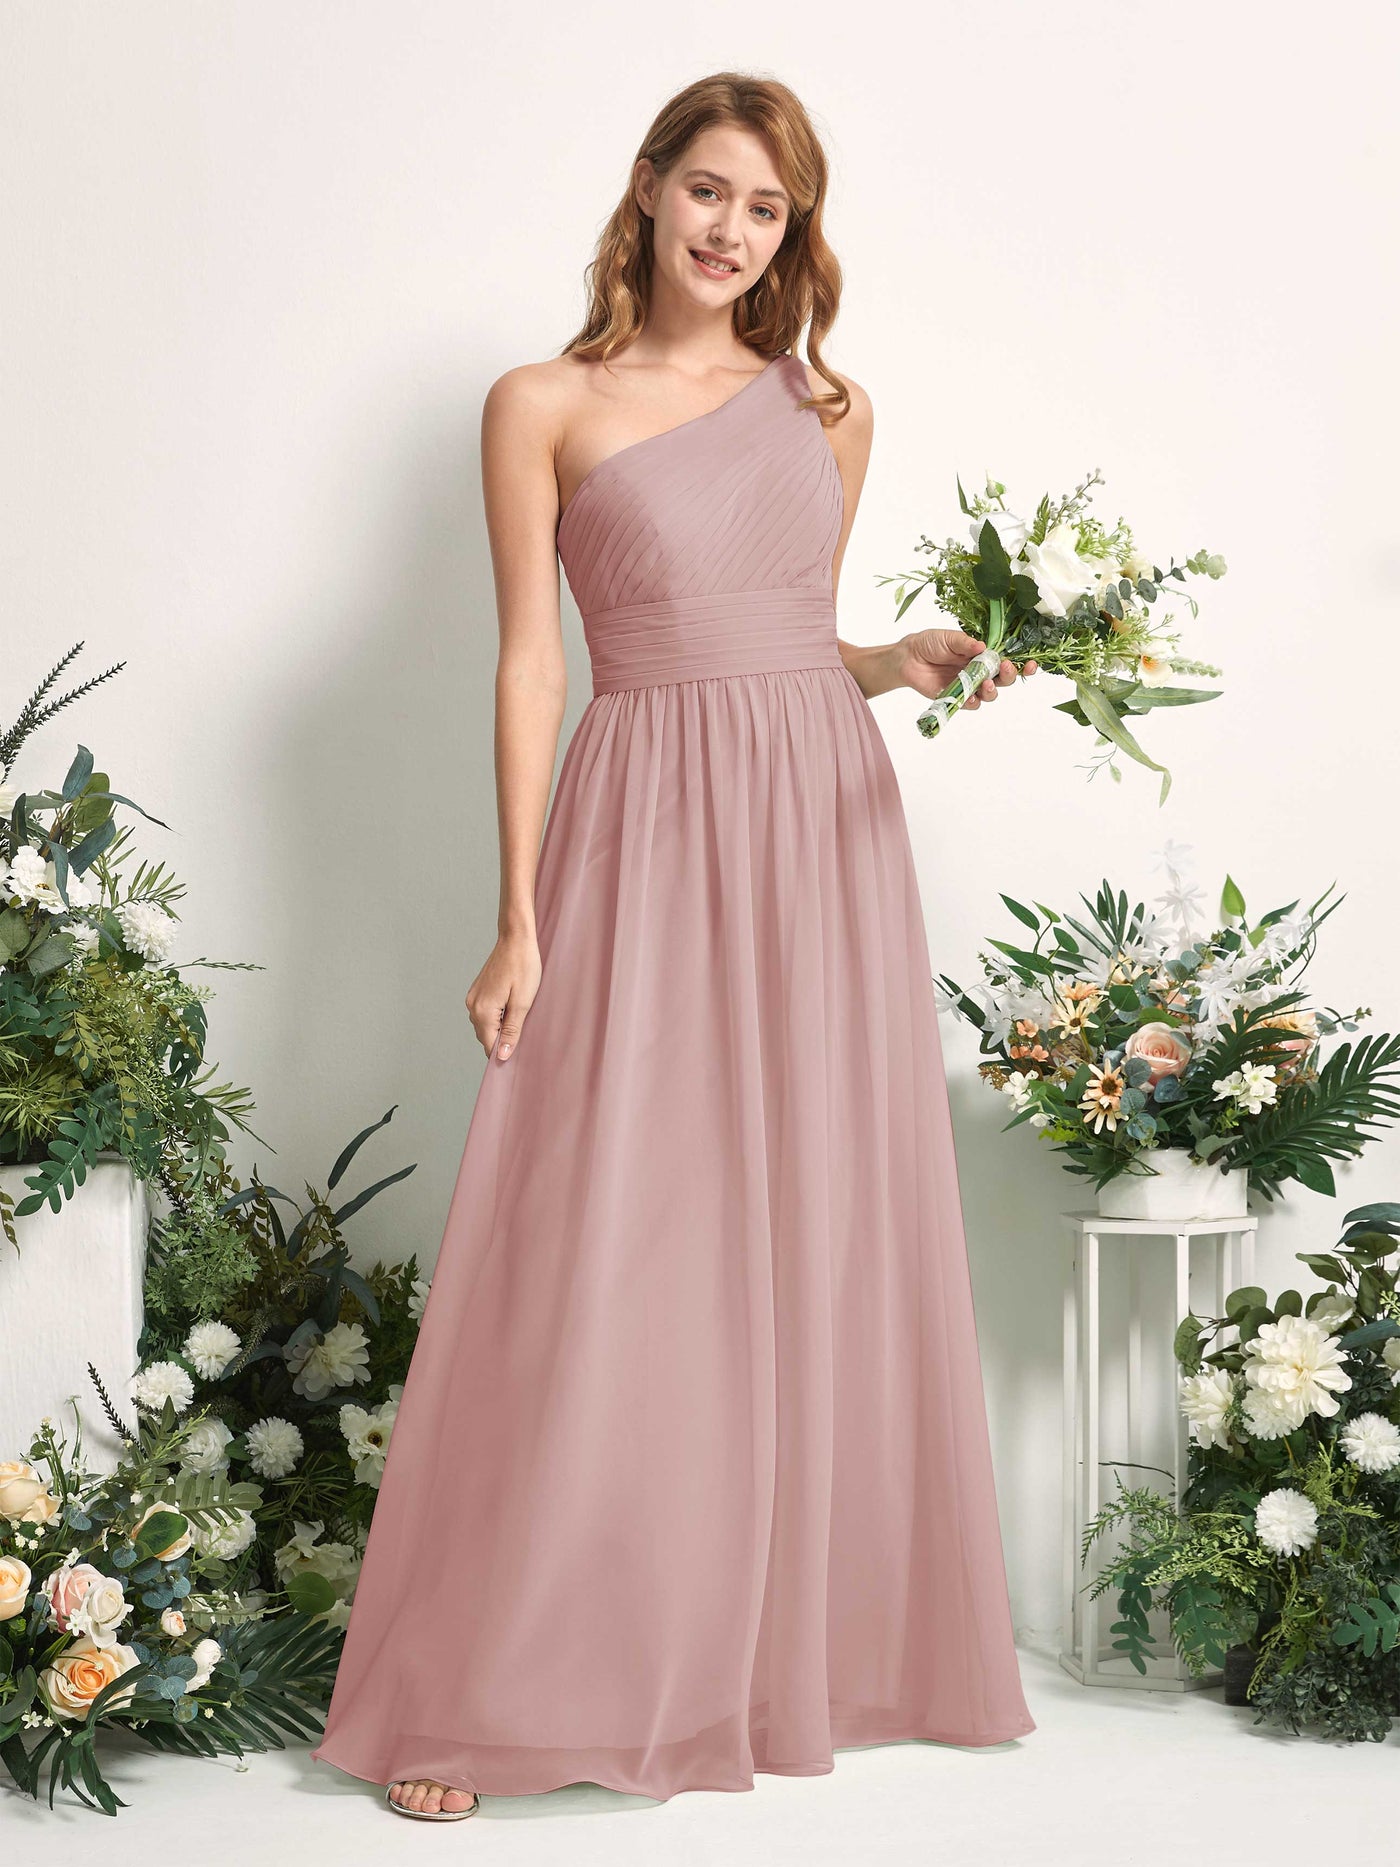 Bridesmaid Dress A-line Chiffon One Shoulder Full Length Sleeveless Wedding Party Dress - Dusty Rose (81226709)#color_dusty-rose